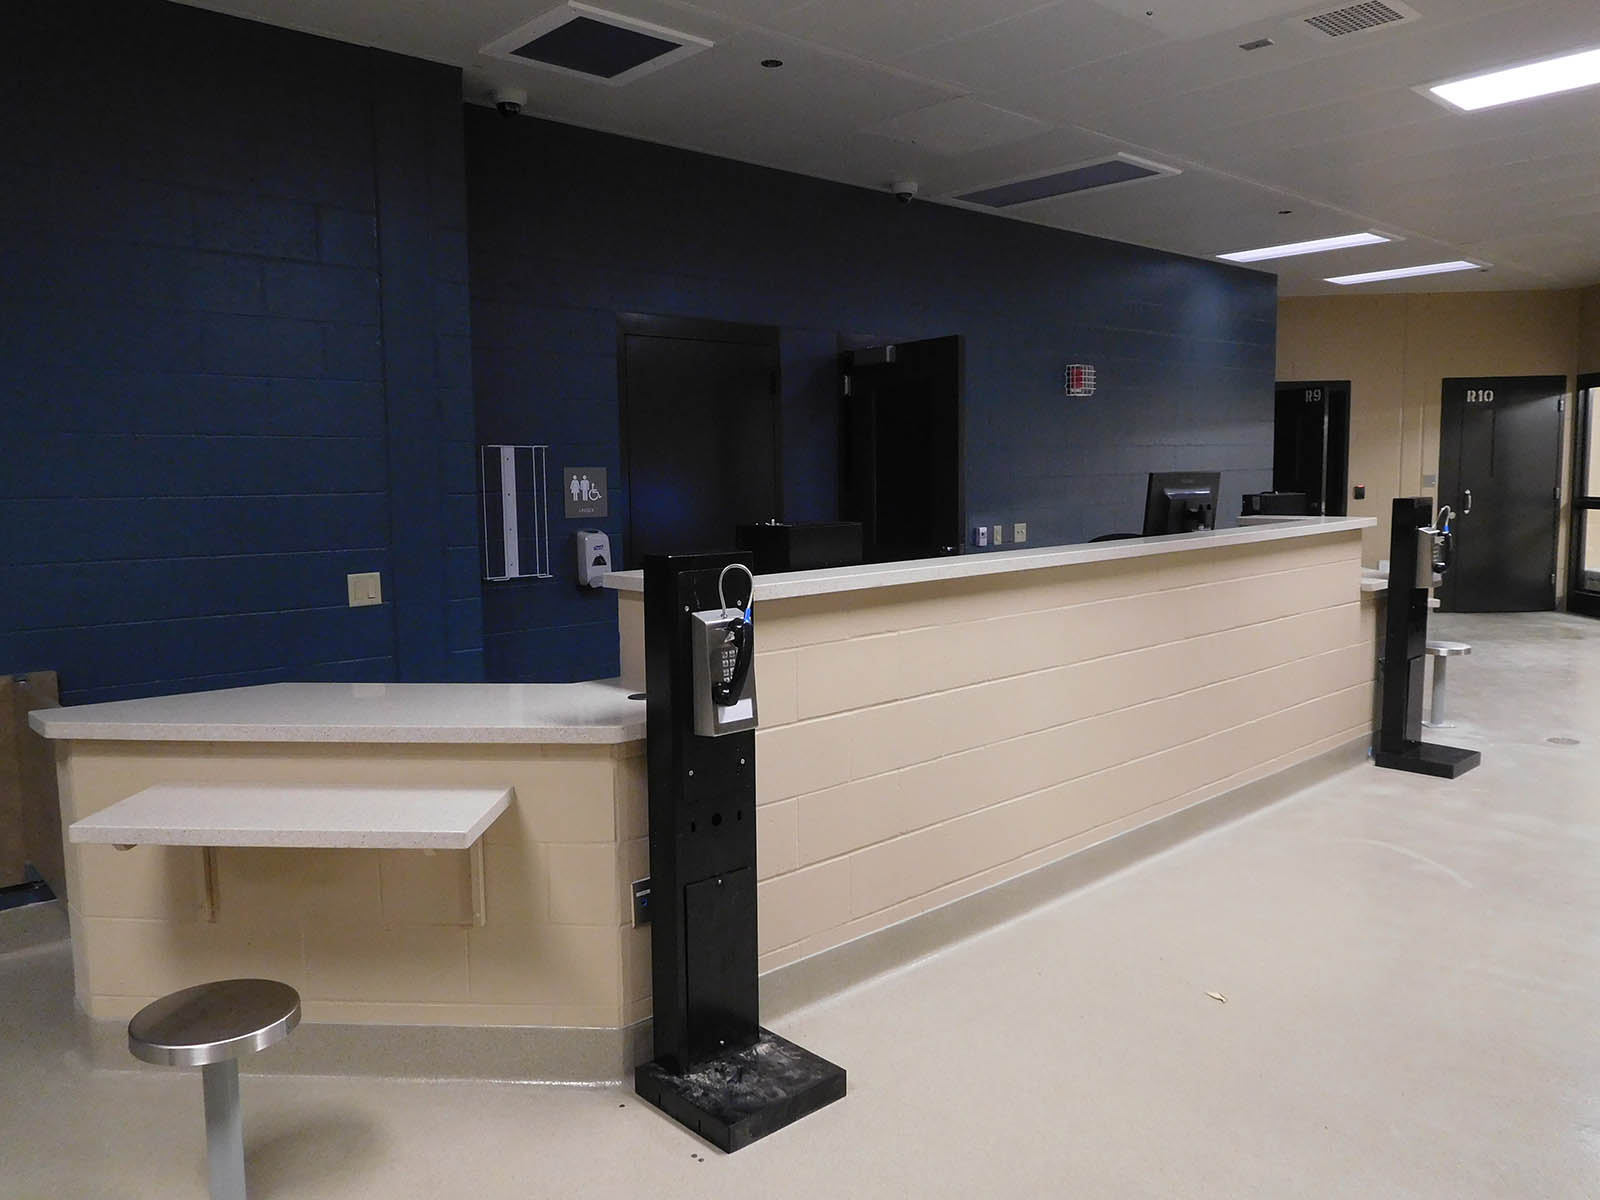 common area at the Oconto County Law Enforcement Center with bathrooms and benches with phones